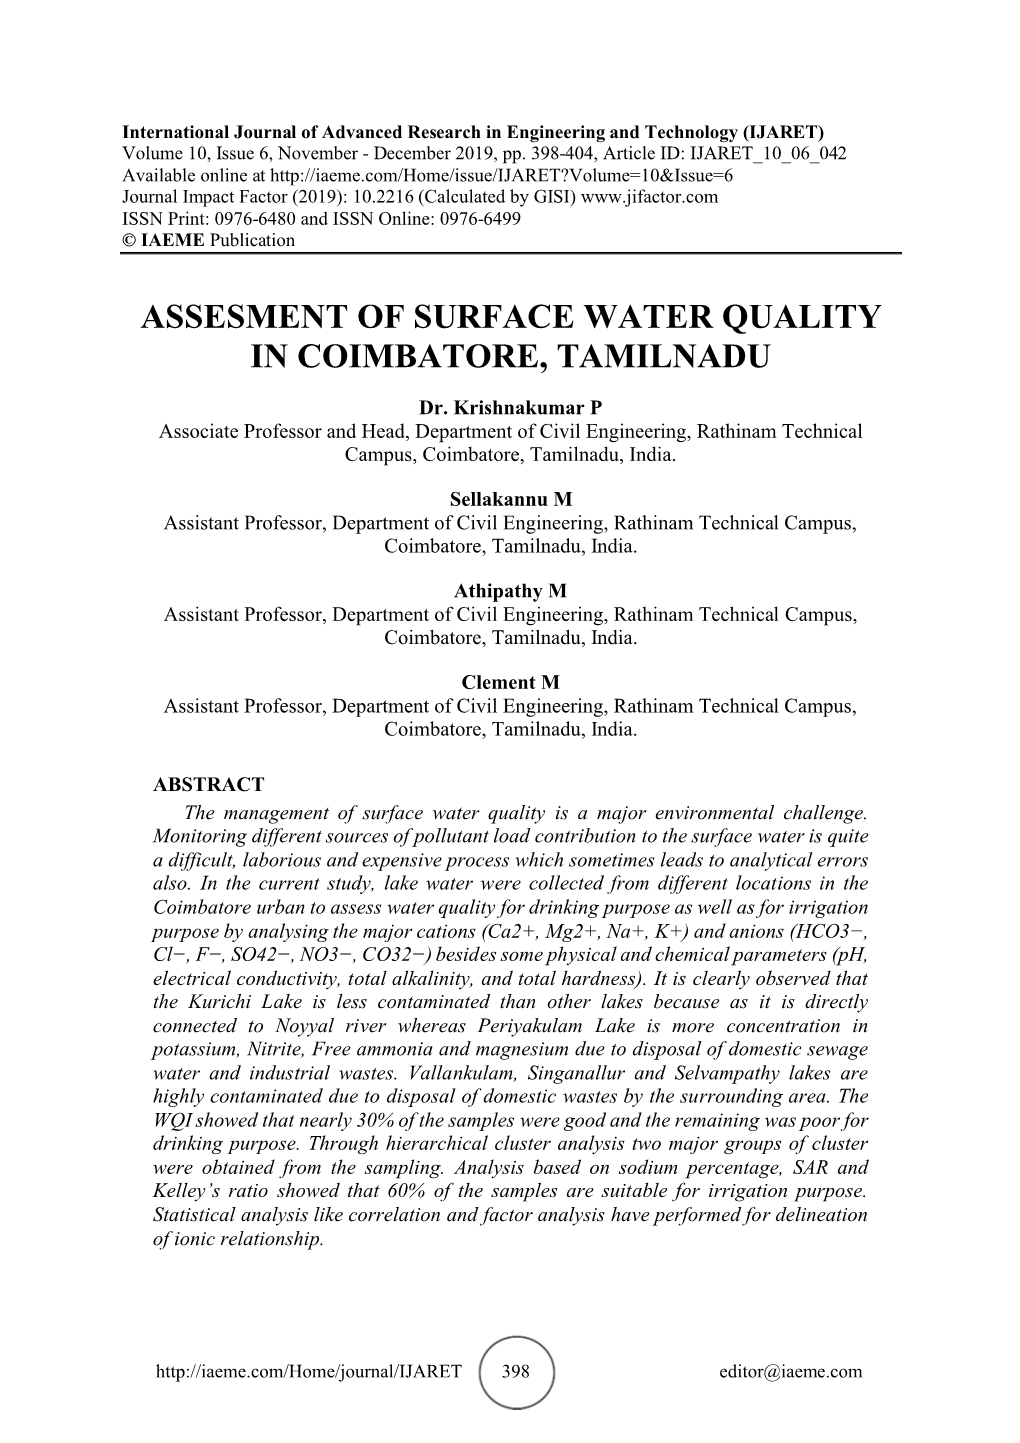 Assesment of Surface Water Quality in Coimbatore, Tamilnadu